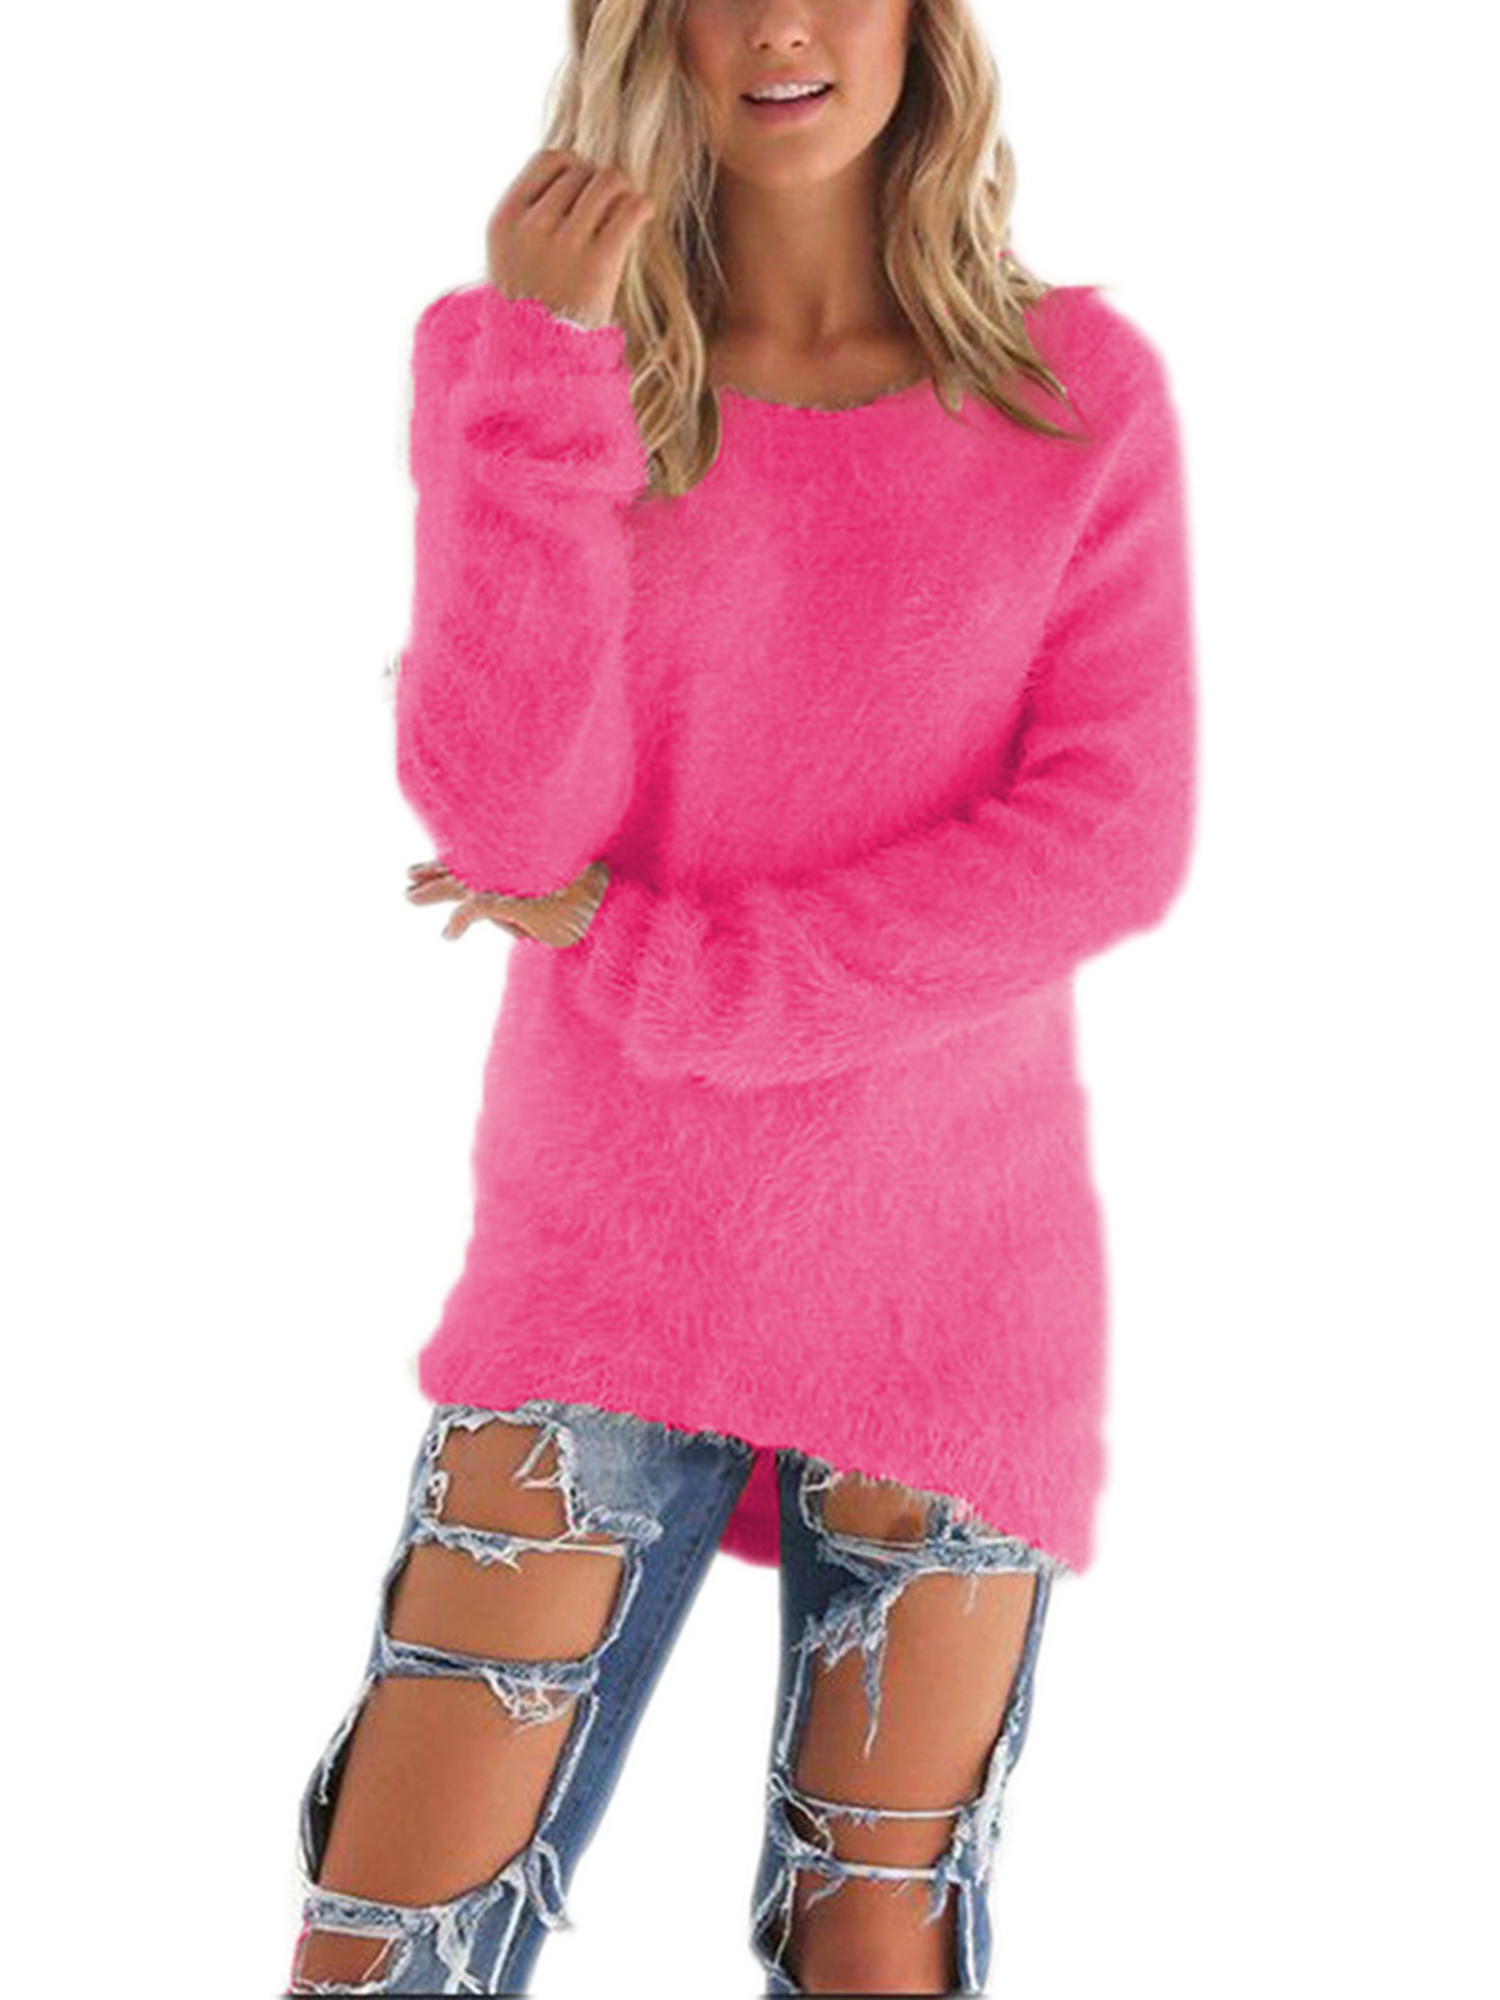 Plus Size Women Mid-Length Loose Solid Color Pullover Sweaters High Low Fluffy Tunics Crew Neck Womens Knit Tops for Junior Ladies Women - image 1 of 3